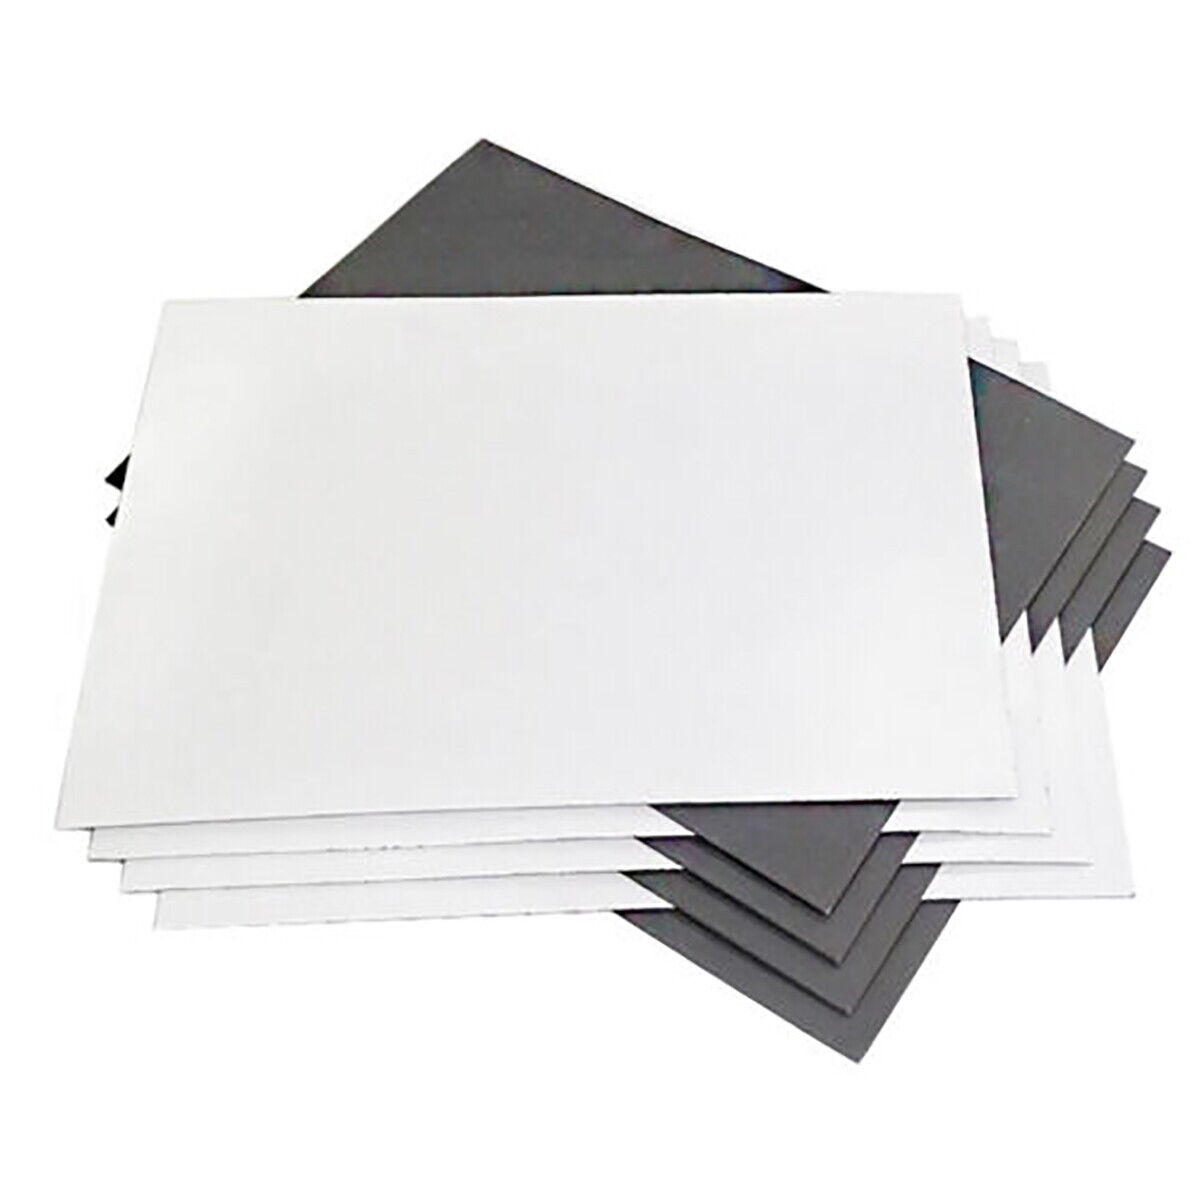 Self-adhesive Magnetic Sheets, Strong Magnetic Sheets